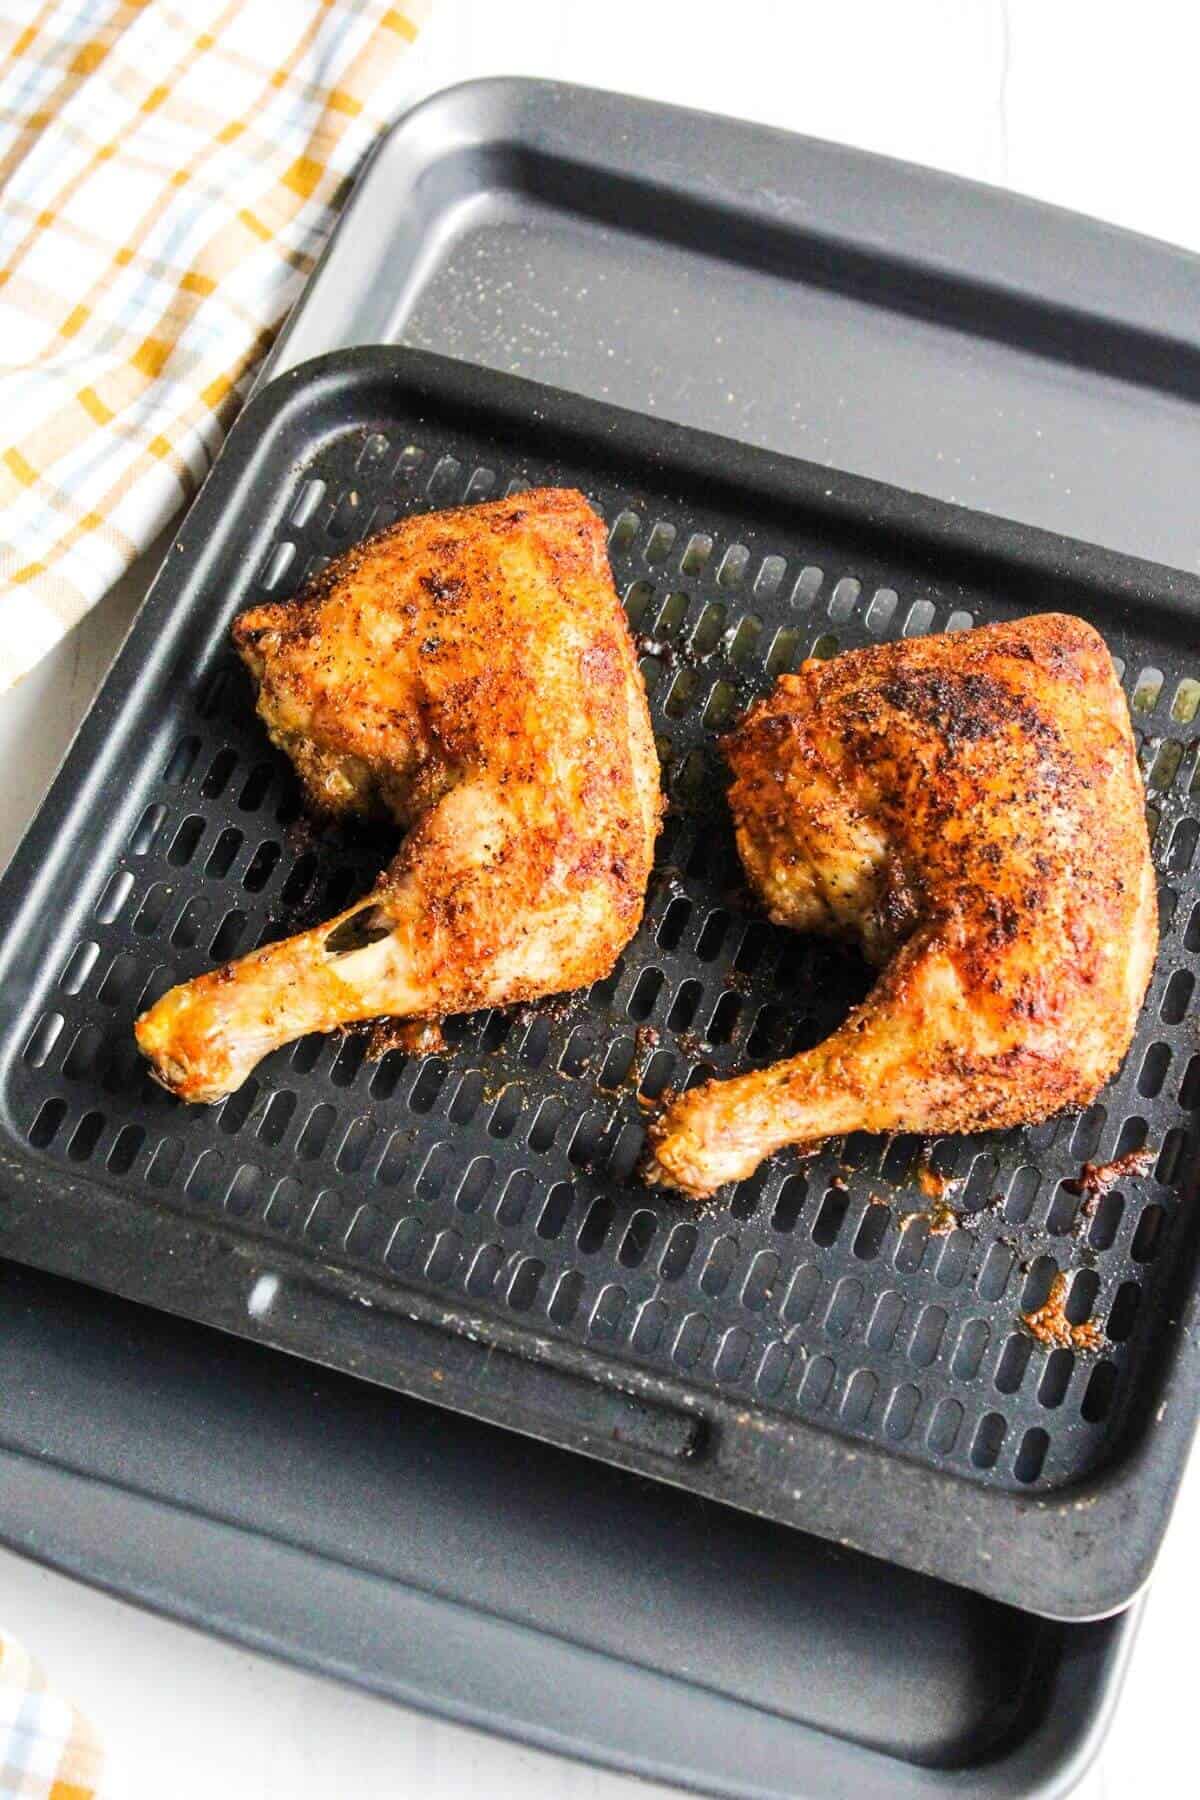 Cooked chicken legs on air fryer tray.